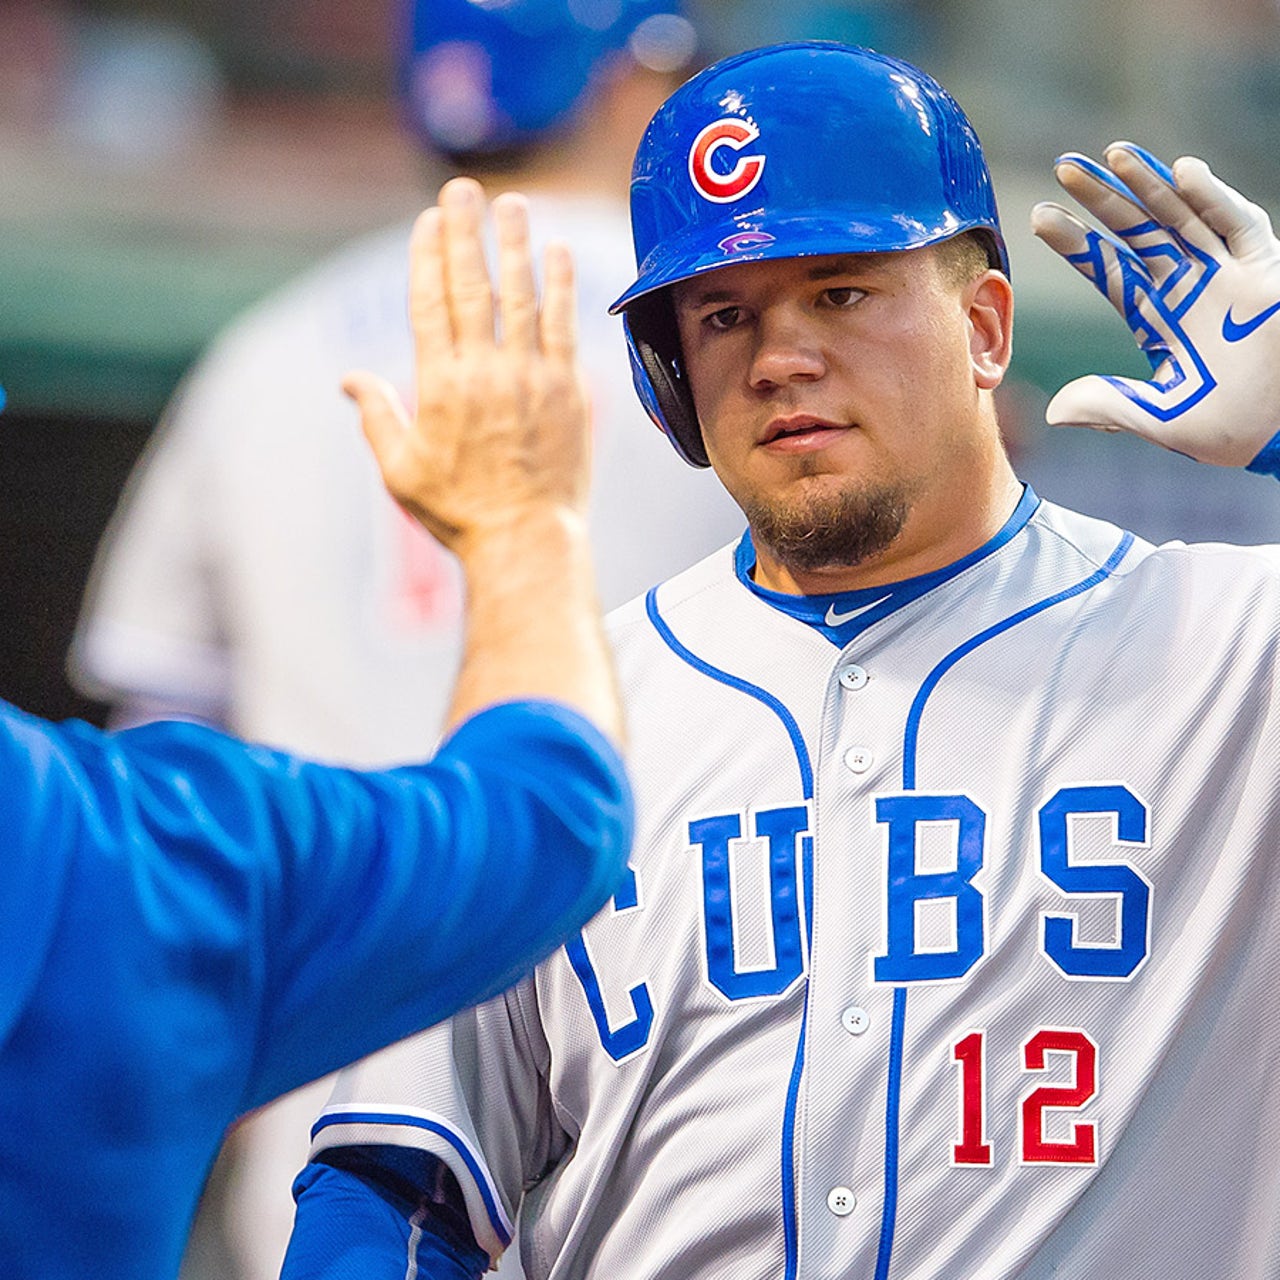 Kyle Schwarber didn't blow his first shot in left, or fall asleep